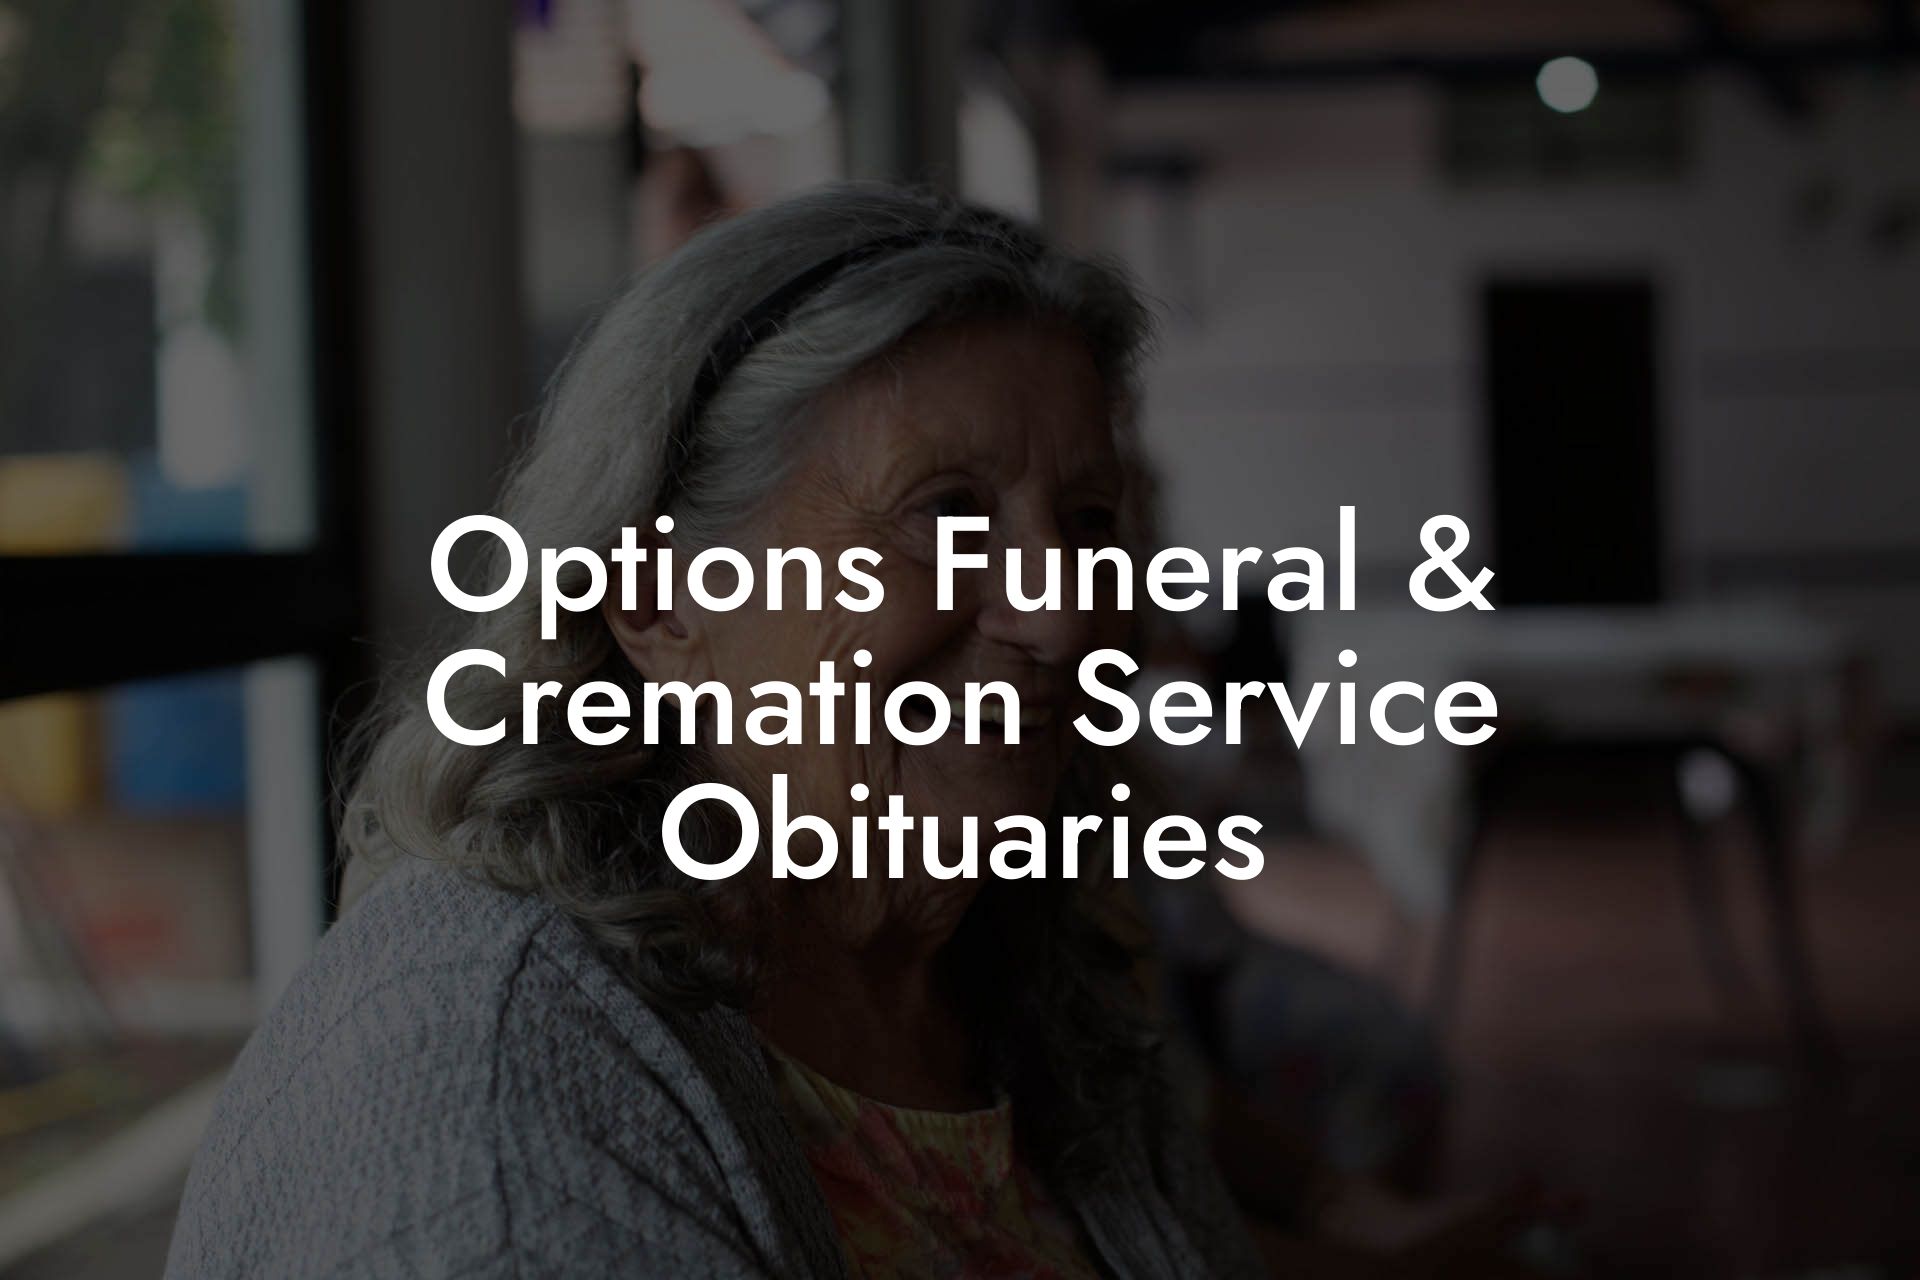 Options Funeral & Cremation Service Obituaries